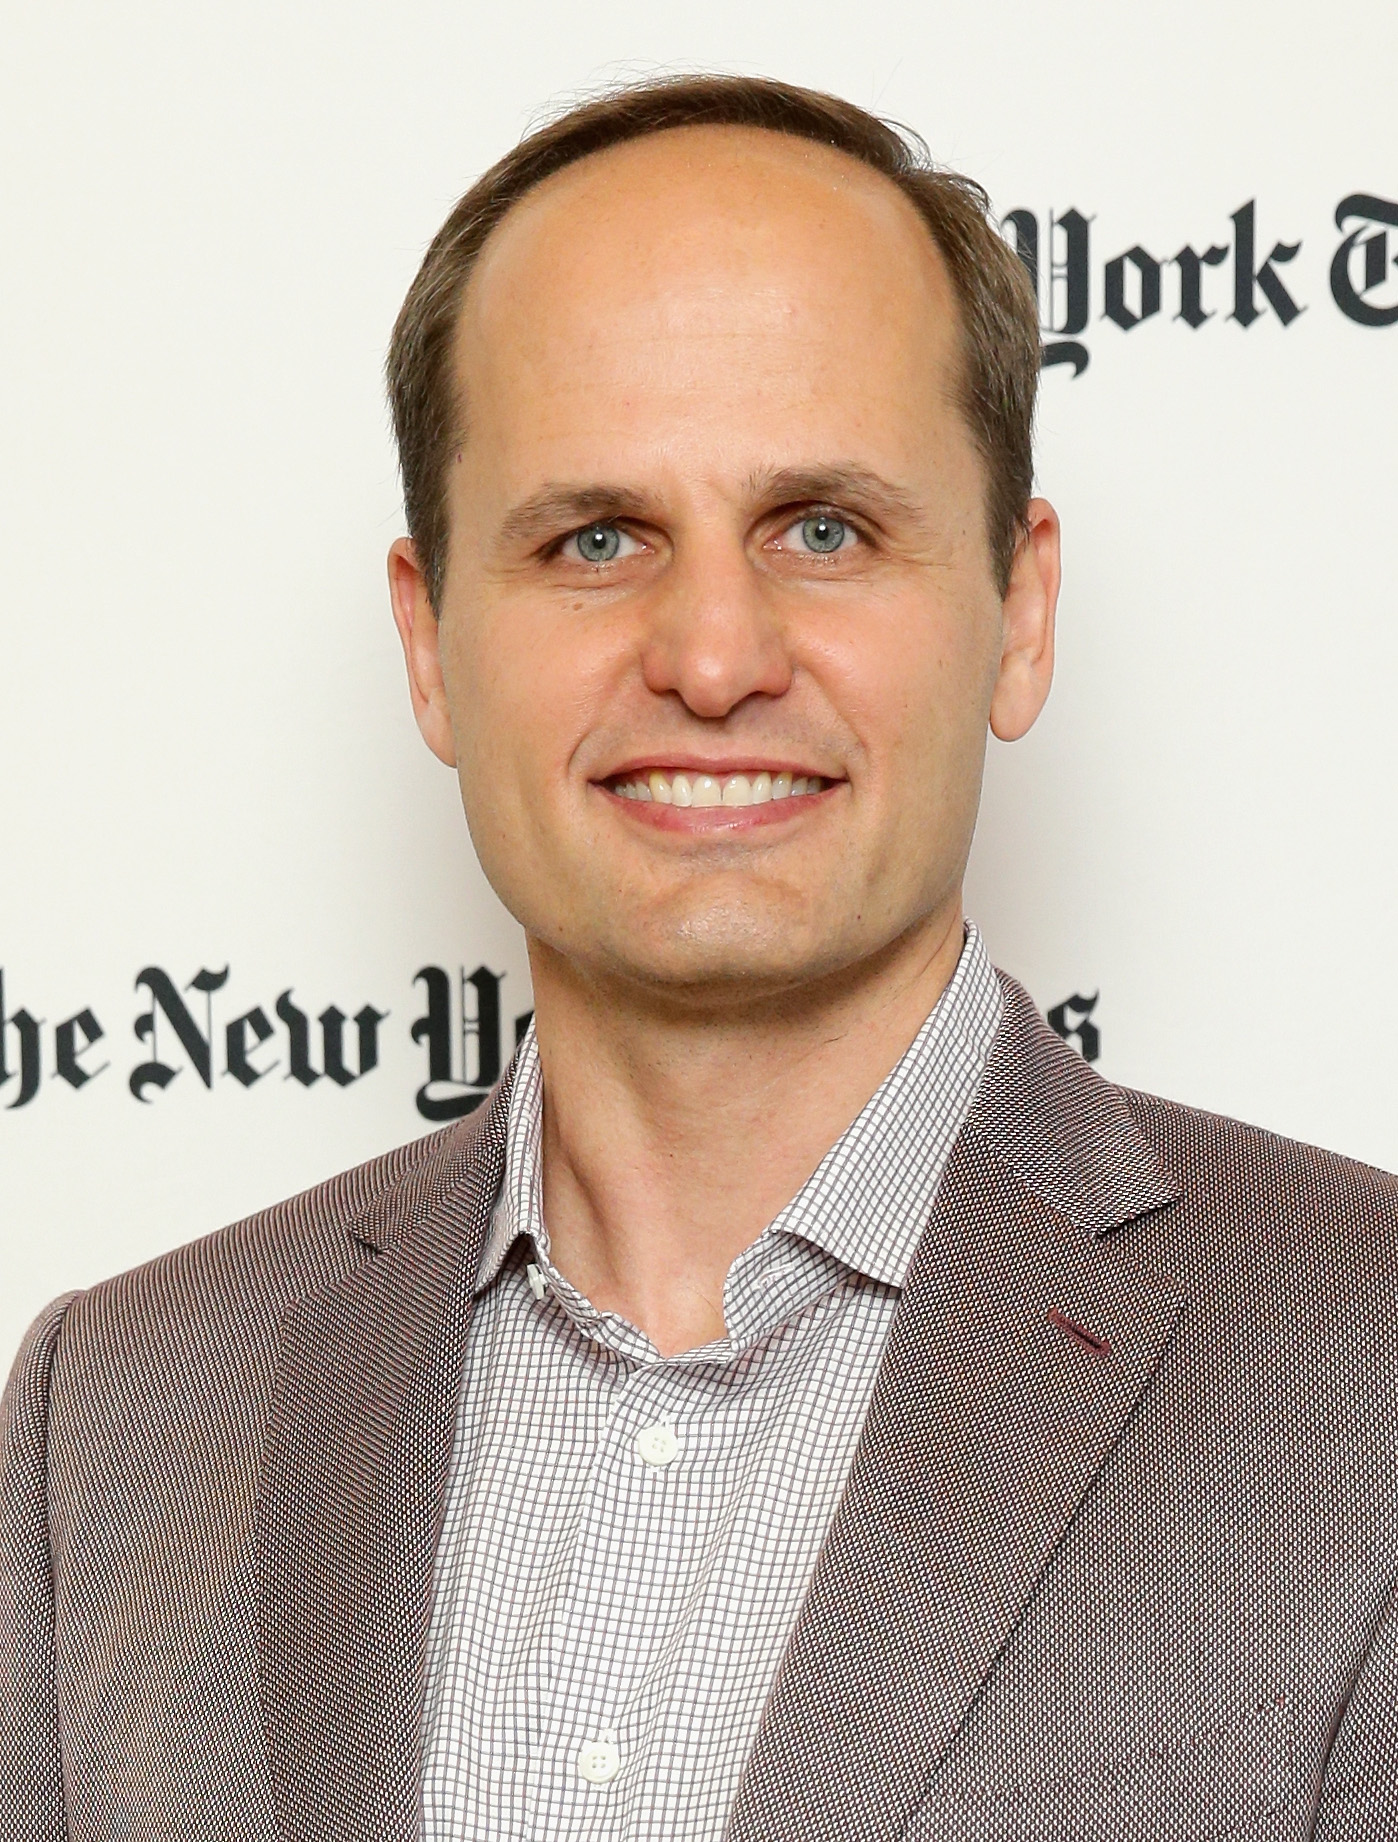 Google Senior Vice President of People Operations Laszlo Bock attends The New York Times Next New World Conference on June 12, 2014 in San Francisco, California.